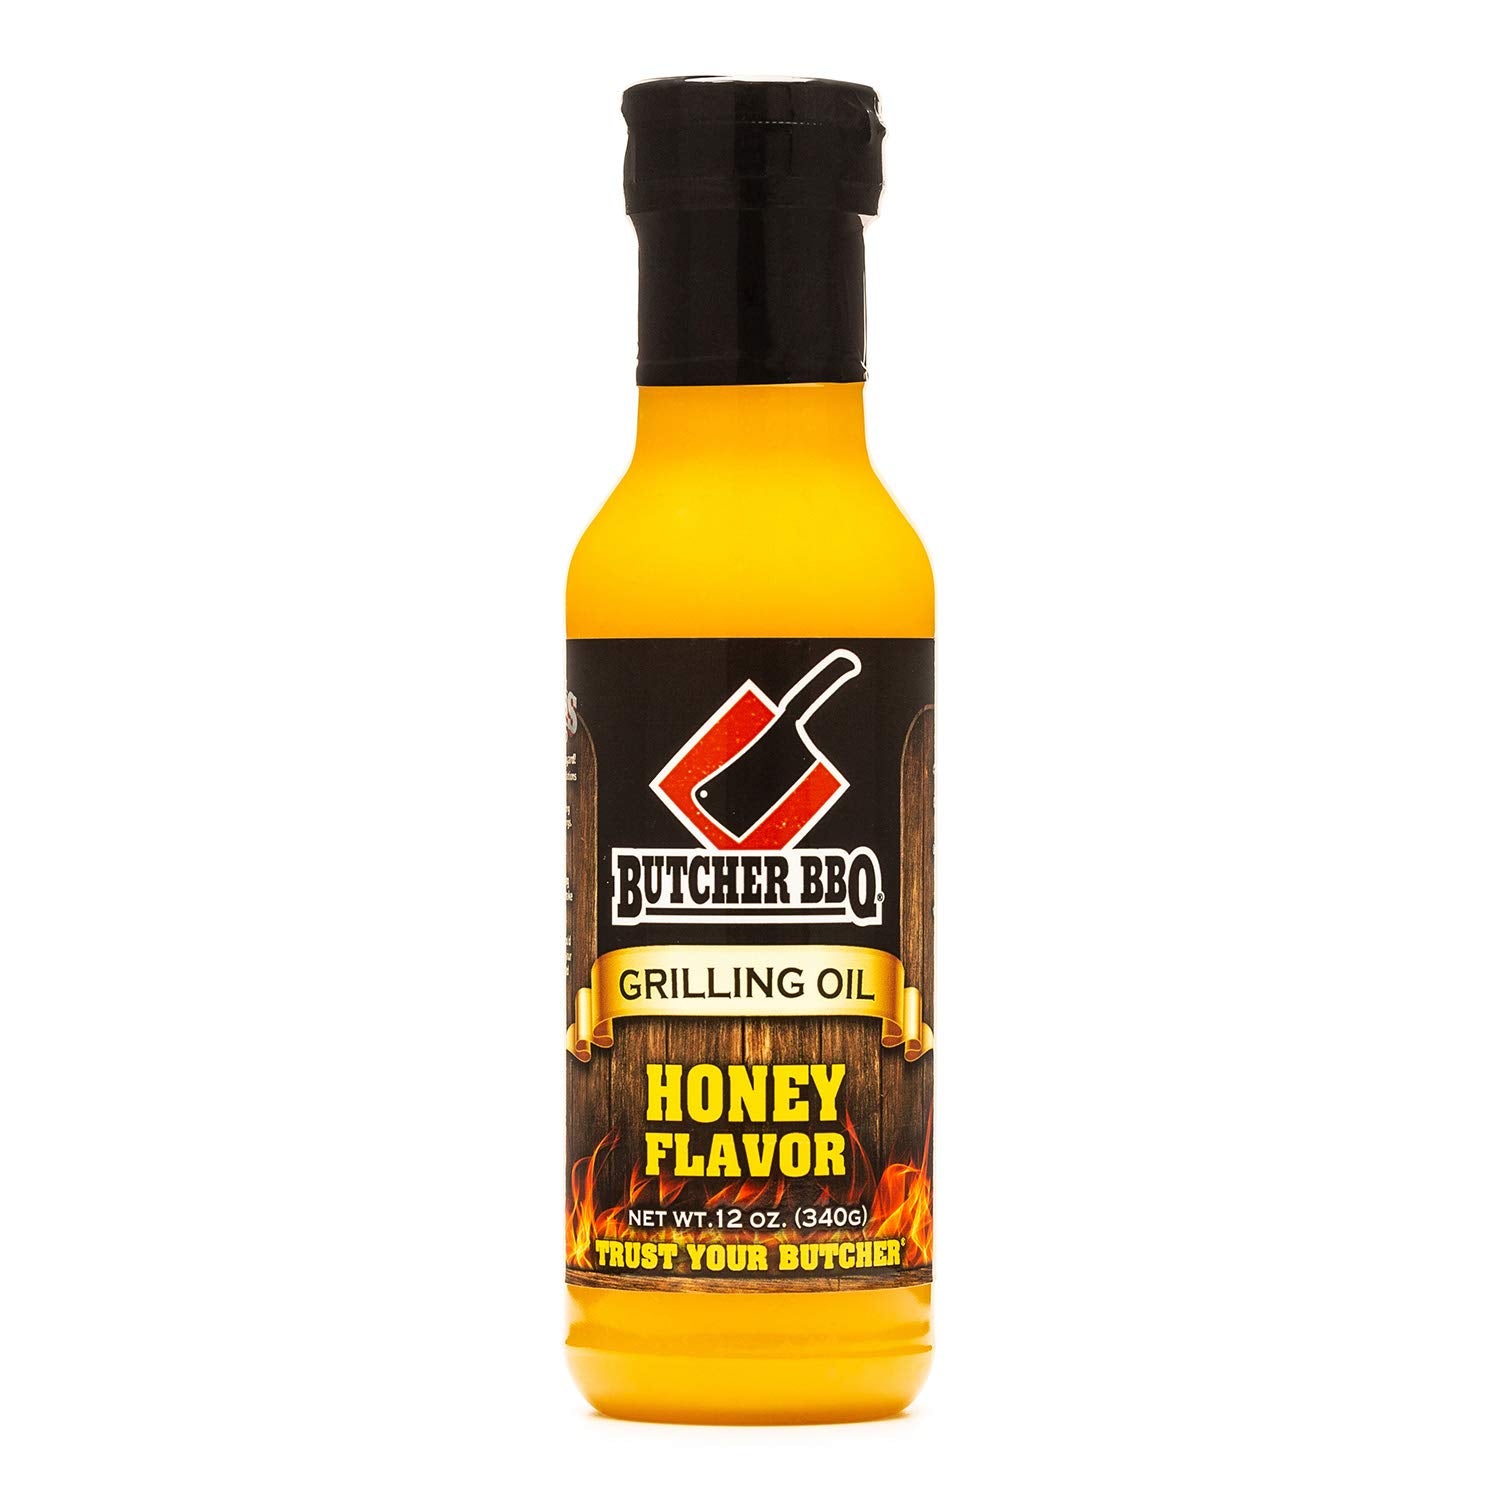 Butcher BBQ Honey Flavor Grilling Oil 12 Oz Bottle Competition Rated MSG Free